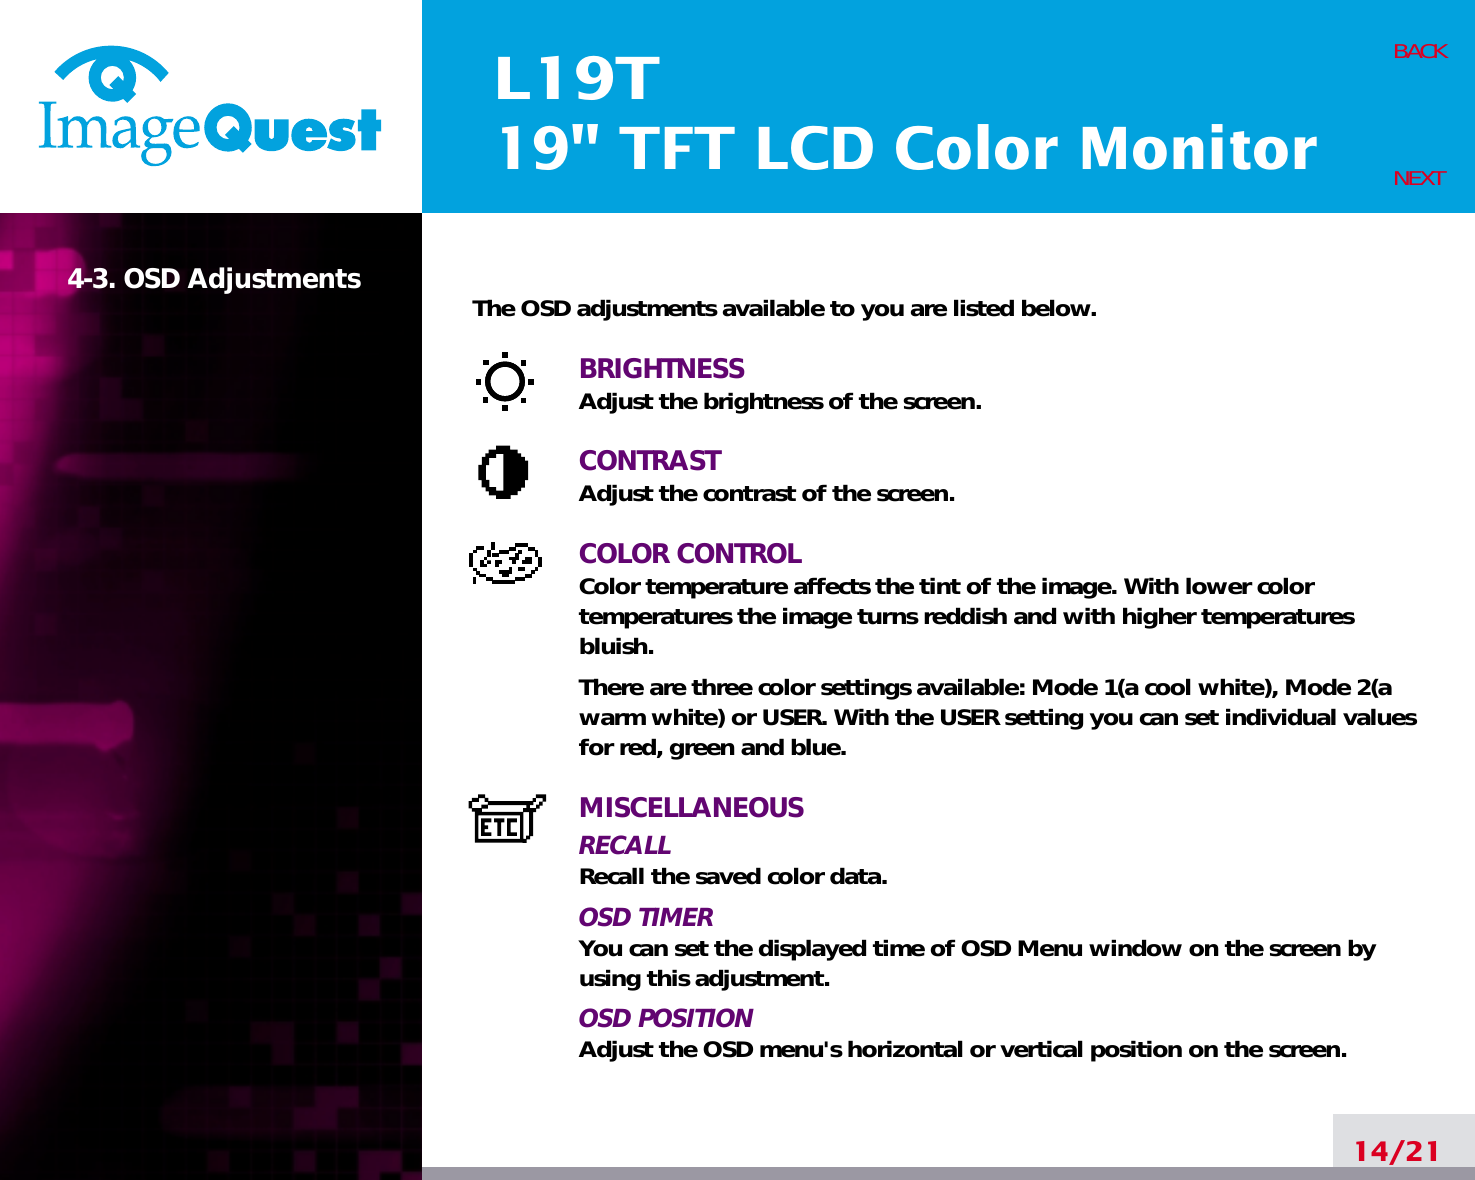 L19T19&quot; TFT LCD Color Monitor14/21BACKNEXT4-3. OSD Adjustments The OSD adjustments available to you are listed below.BRIGHTNESSAdjust the brightness of the screen.CONTRASTAdjust the contrast of the screen.COLOR CONTROLColor temperature affects the tint of the image. With lower color temperatures the image turns reddish and with higher temperatures bluish.There are three color settings available: Mode 1(a cool white), Mode 2(awarm white) or USER. With the USER setting you can set individual valuesfor red, green and blue.MISCELLANEOUSRECALL Recall the saved color data.OSD TIMERYou can set the displayed time of OSD Menu window on the screen byusing this adjustment.OSD POSITIONAdjust the OSD menu&apos;s horizontal or vertical position on the screen.